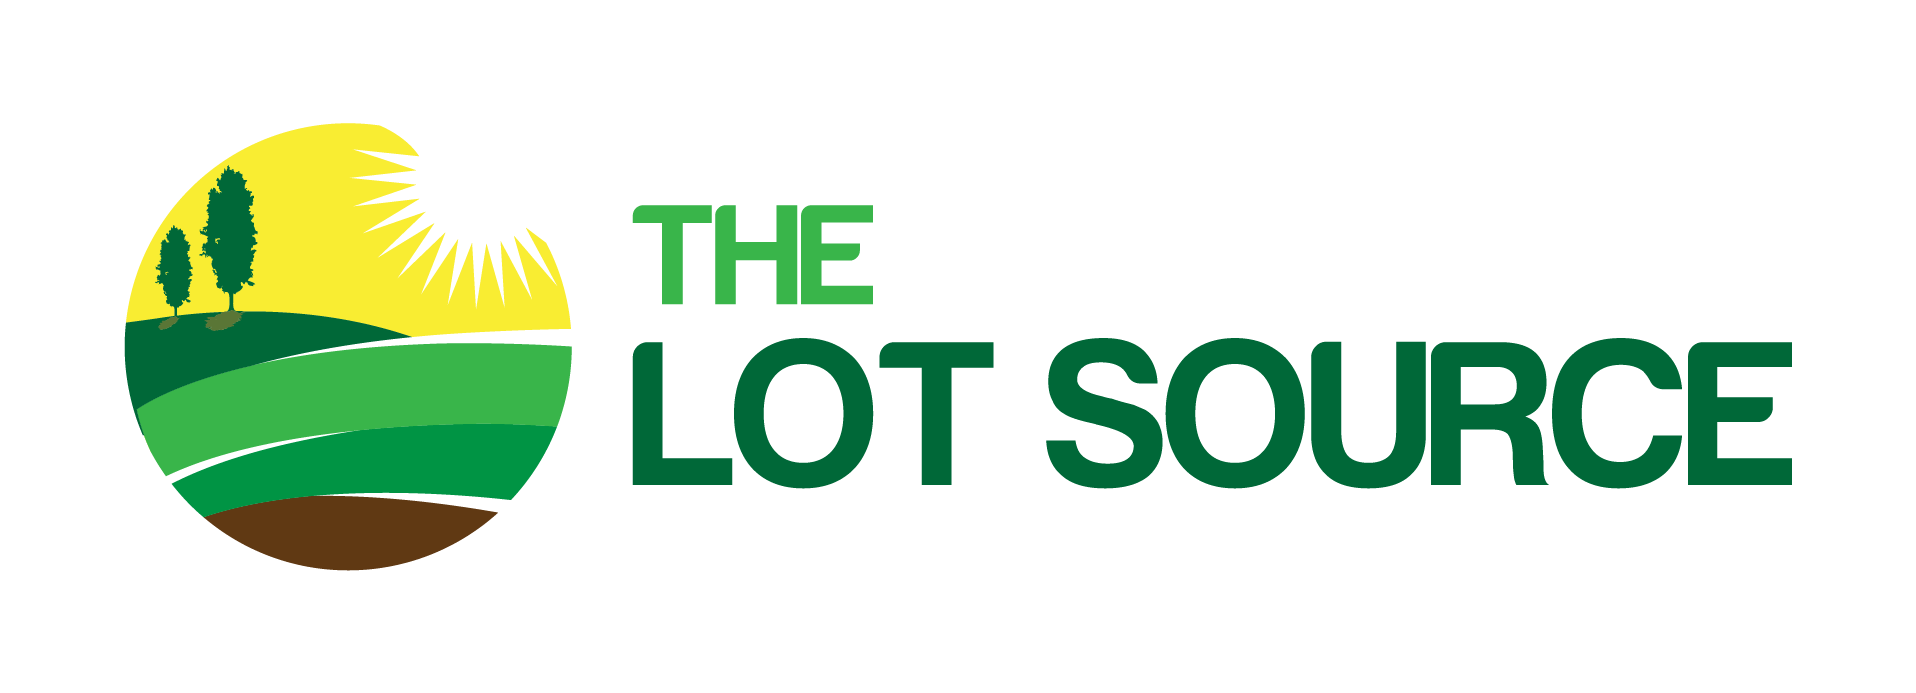 The Lot Source logo